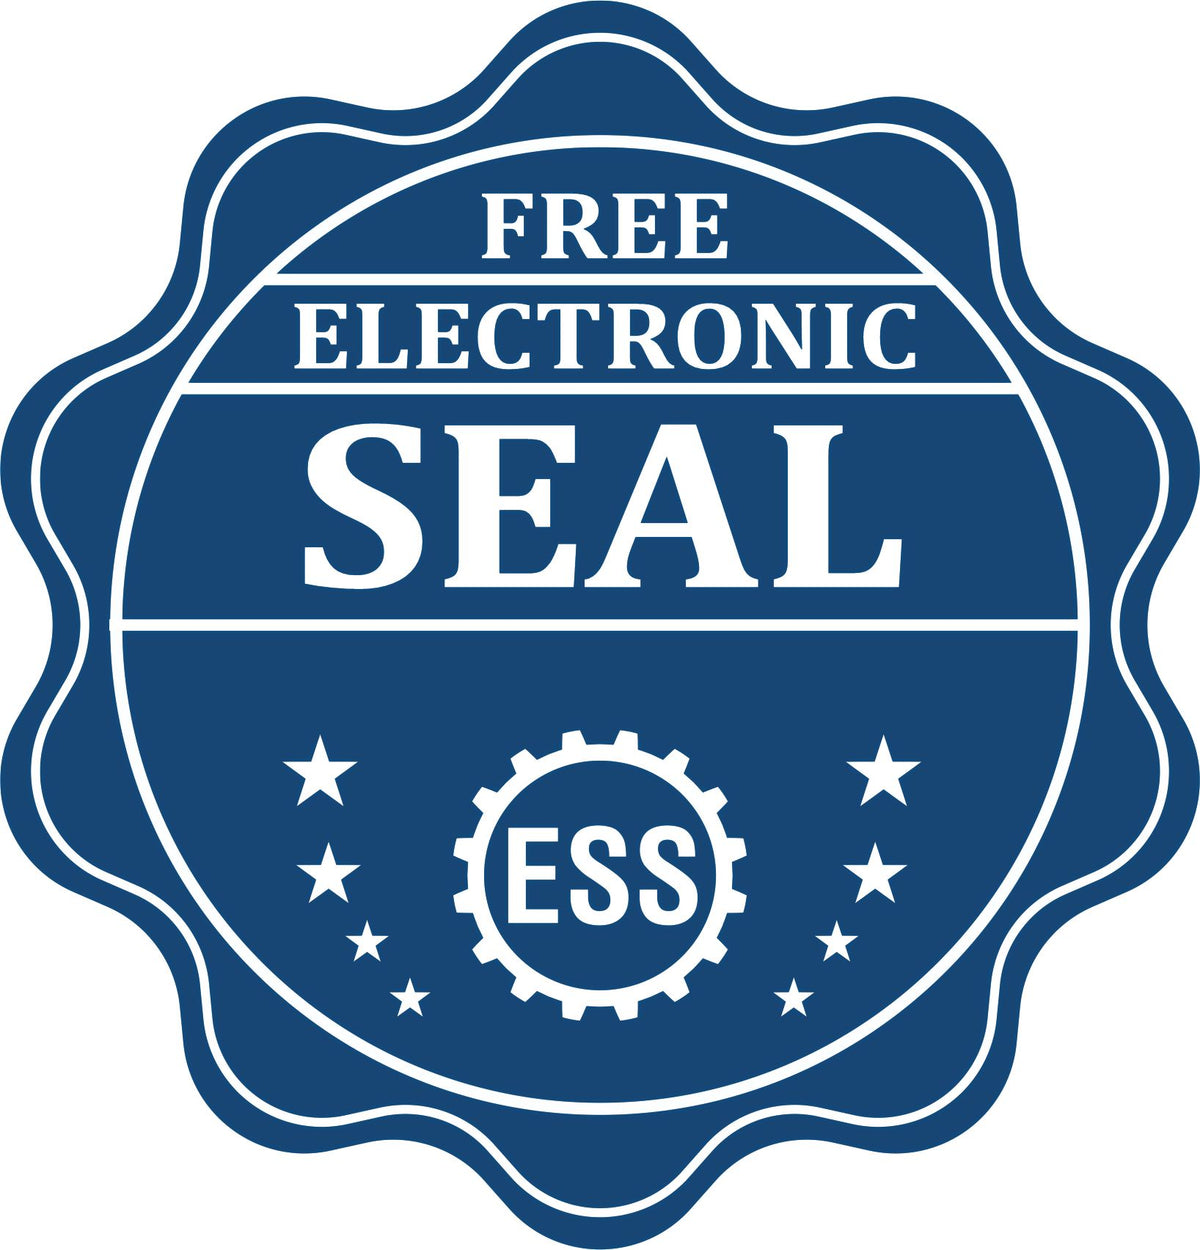 A badge showing a free electronic seal for the Gift Wyoming Engineer Seal with stars and the ESS gear on the emblem.